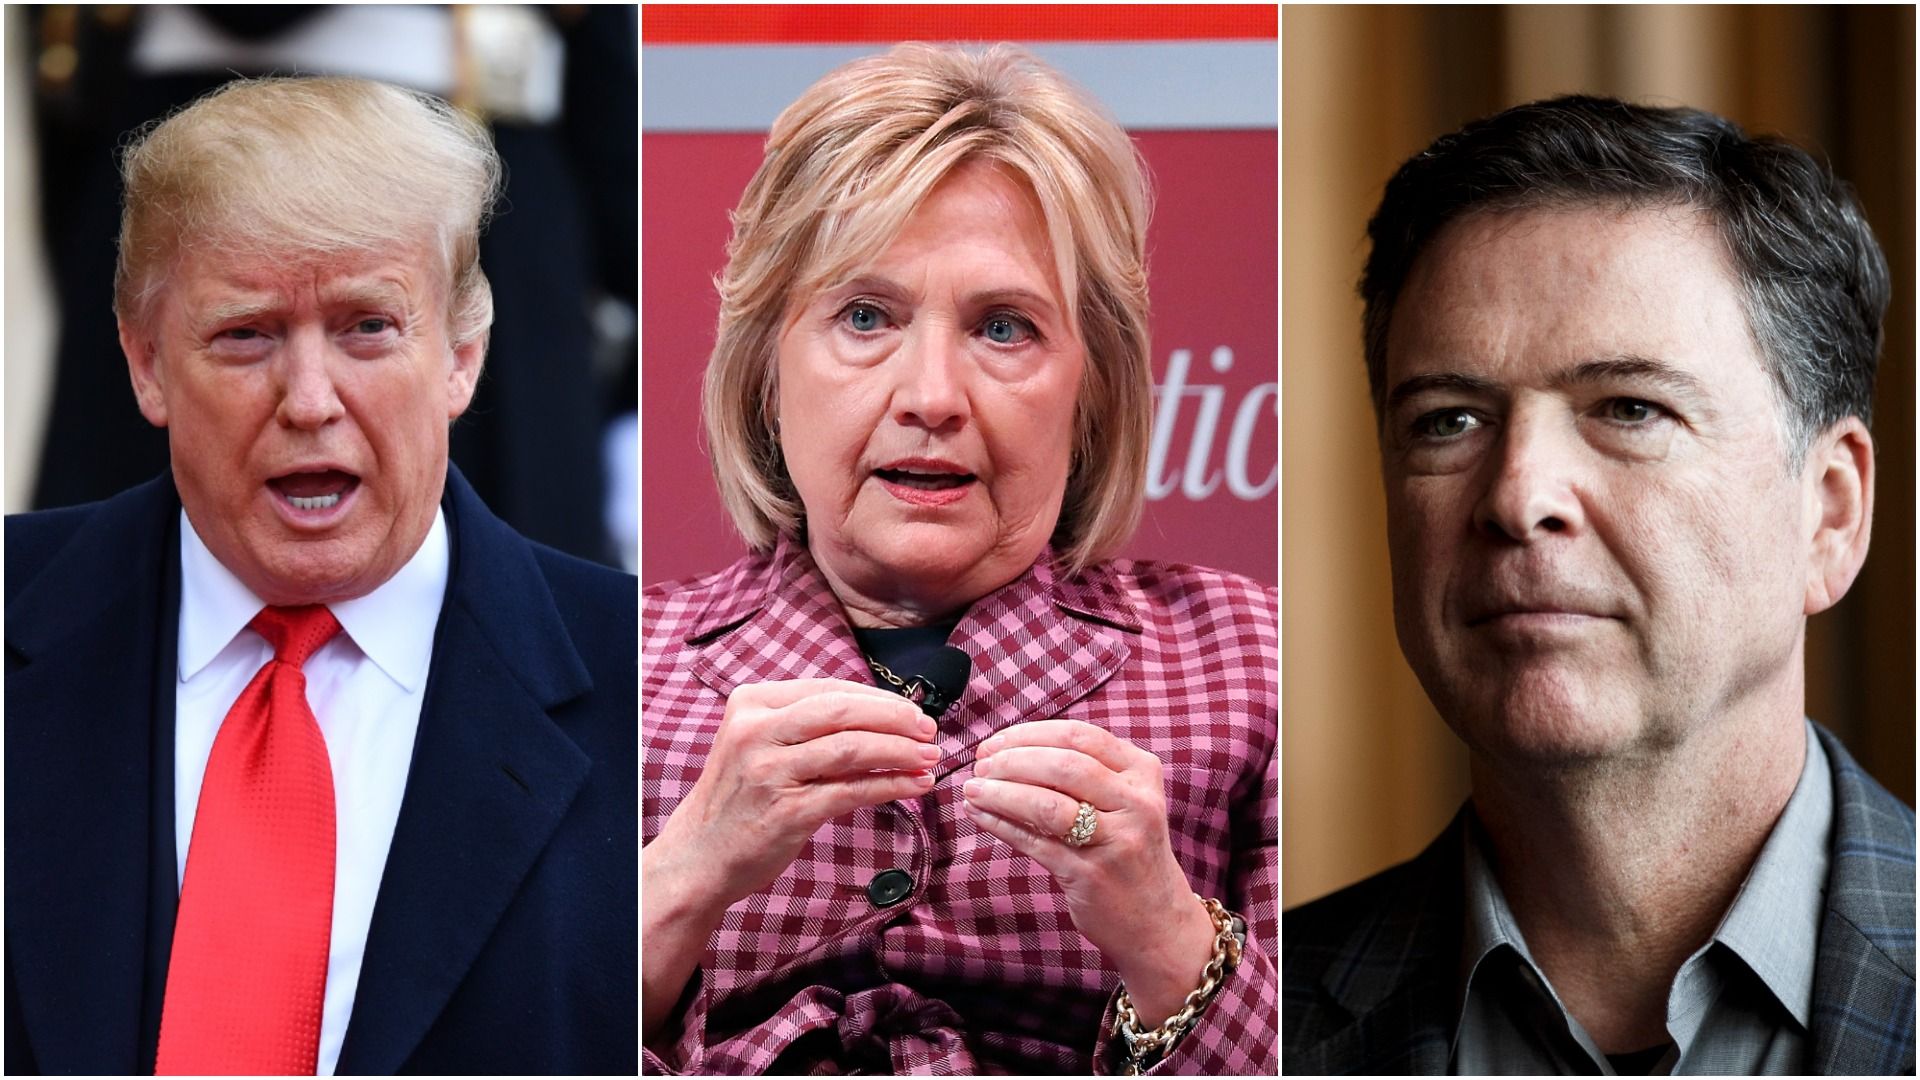 This is a photo of Donald Trump, Hillary Clinton and James Comey